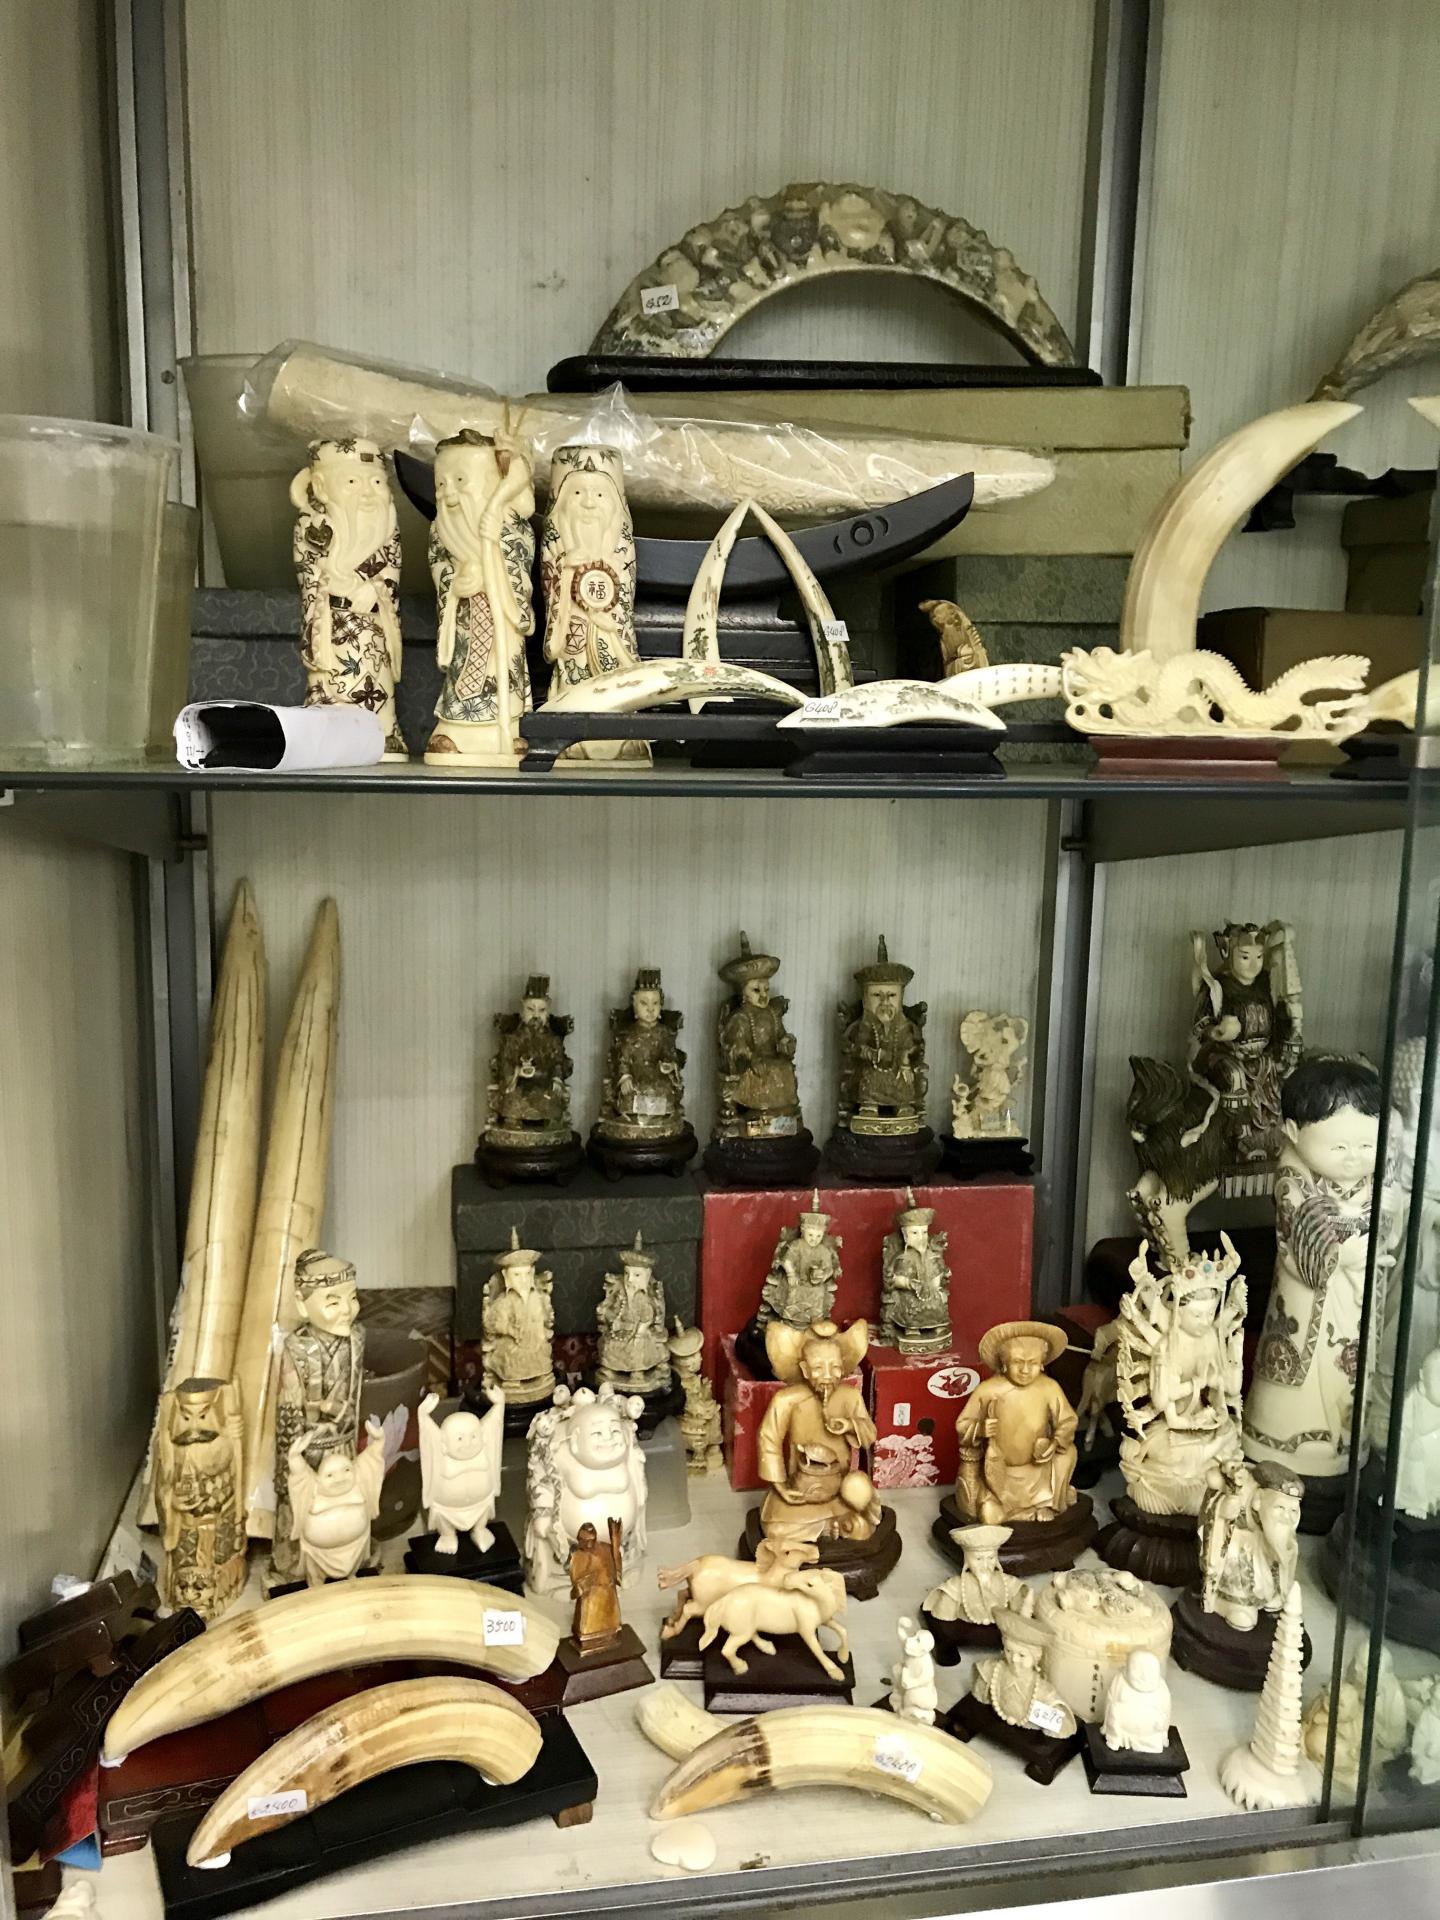 Hippo Teeth Products for Sale in an Ivory Shop in Sheung Wan, Hong Kong